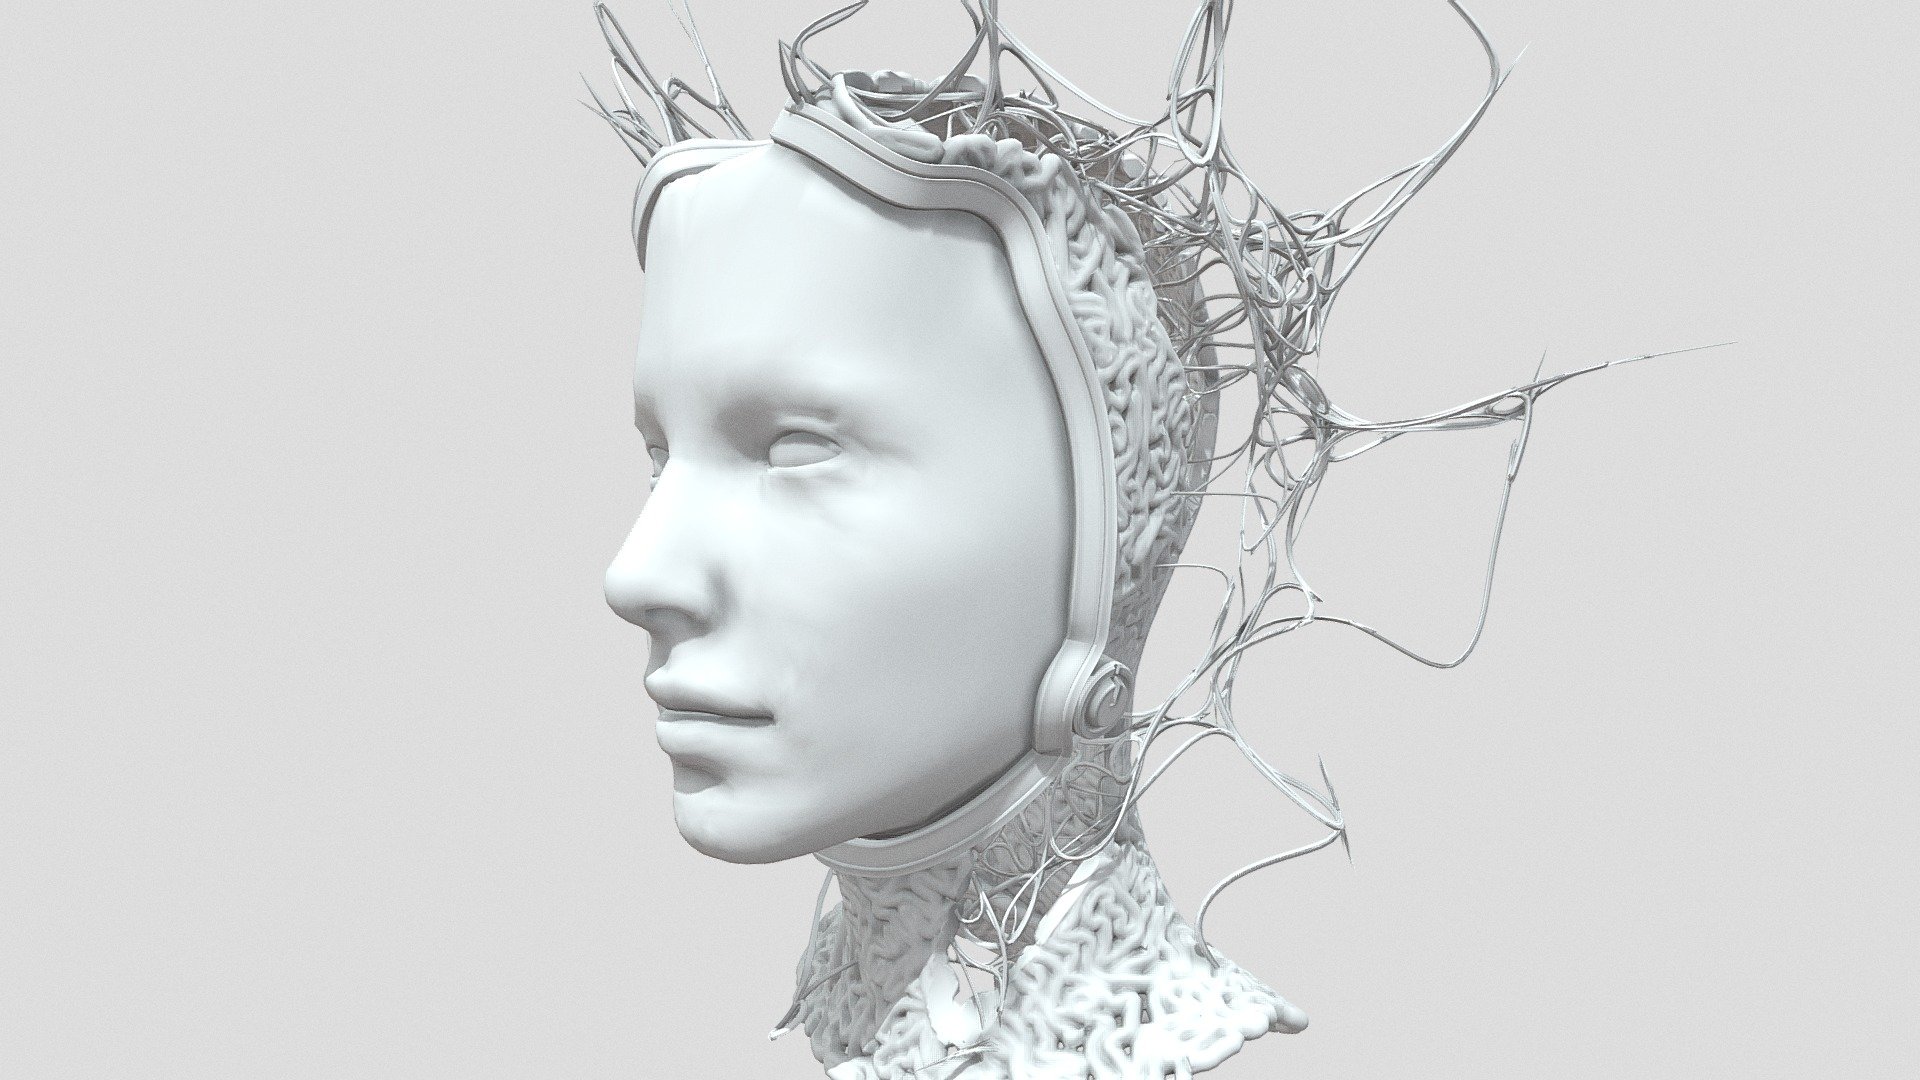 Crown revealing the bio material of our queen, sculpture made with procedurally in HoudiniFx using the Vex shader language 3d model